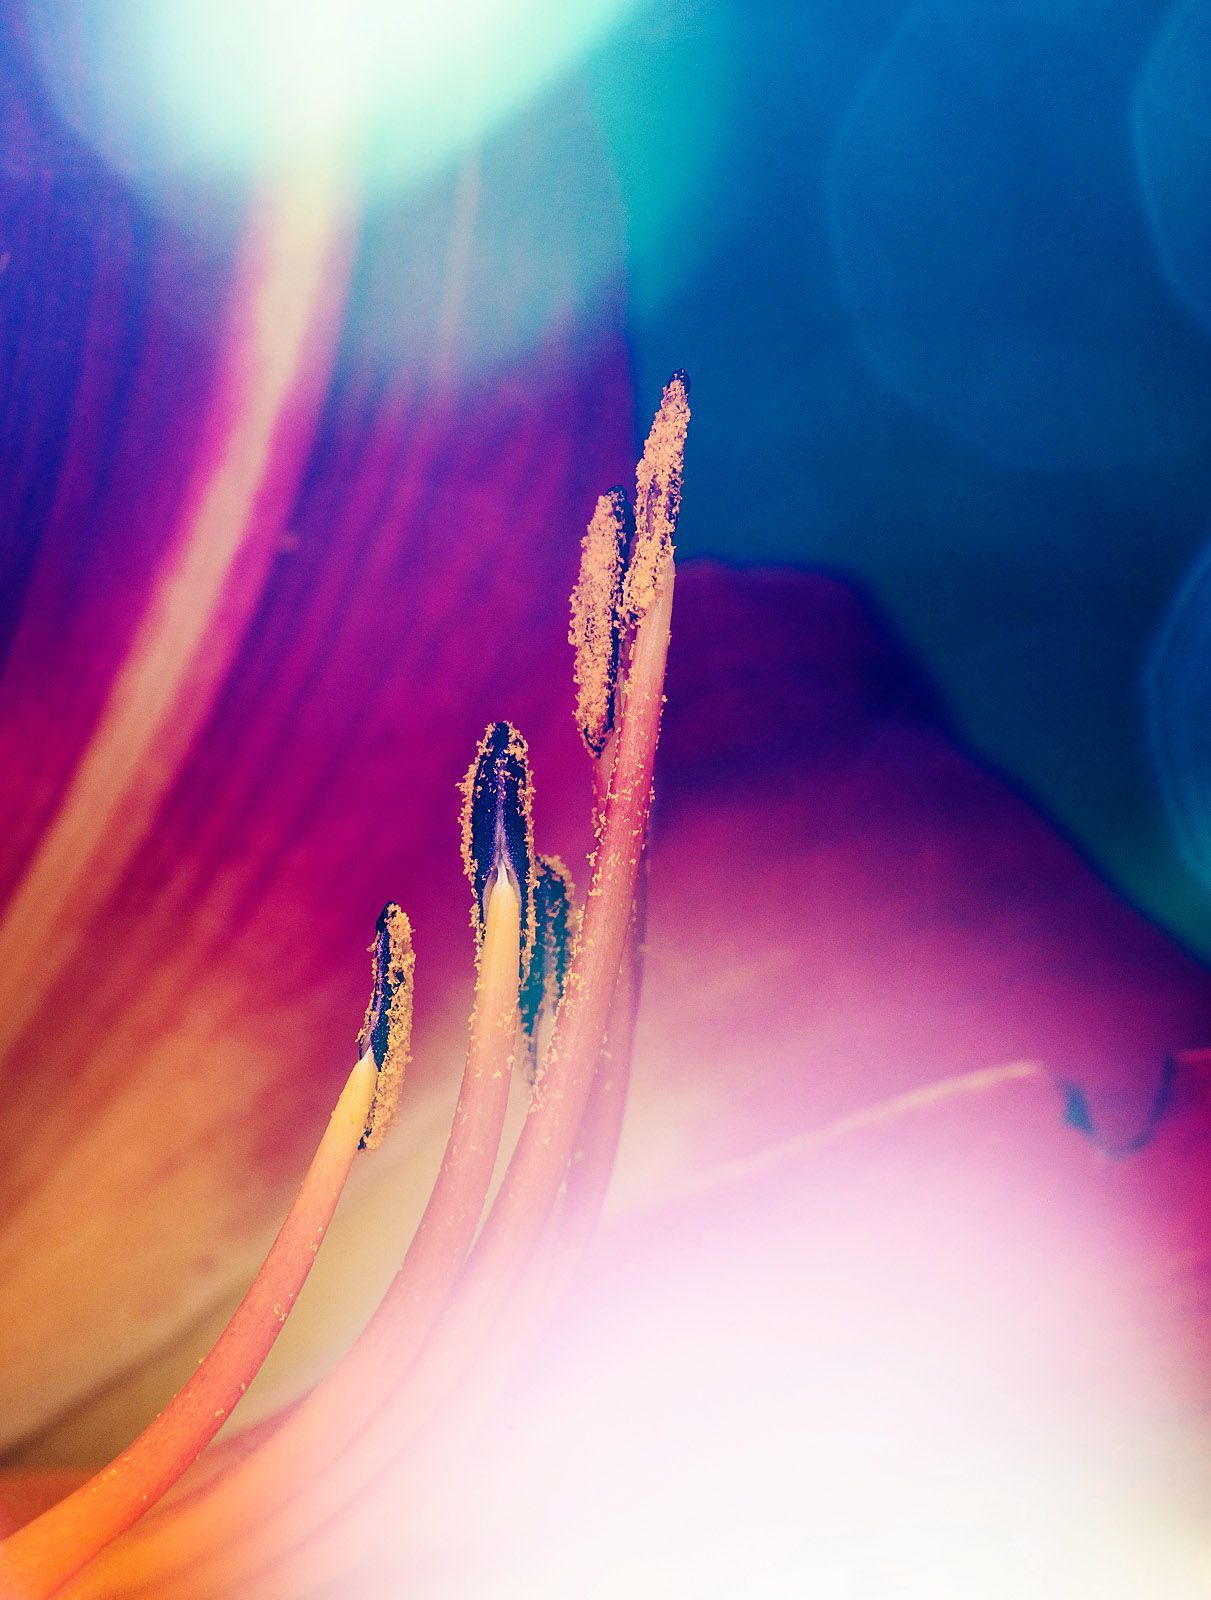 A macro of single lily in the garden on a summer day, lit by a solo strobe to create pure art.